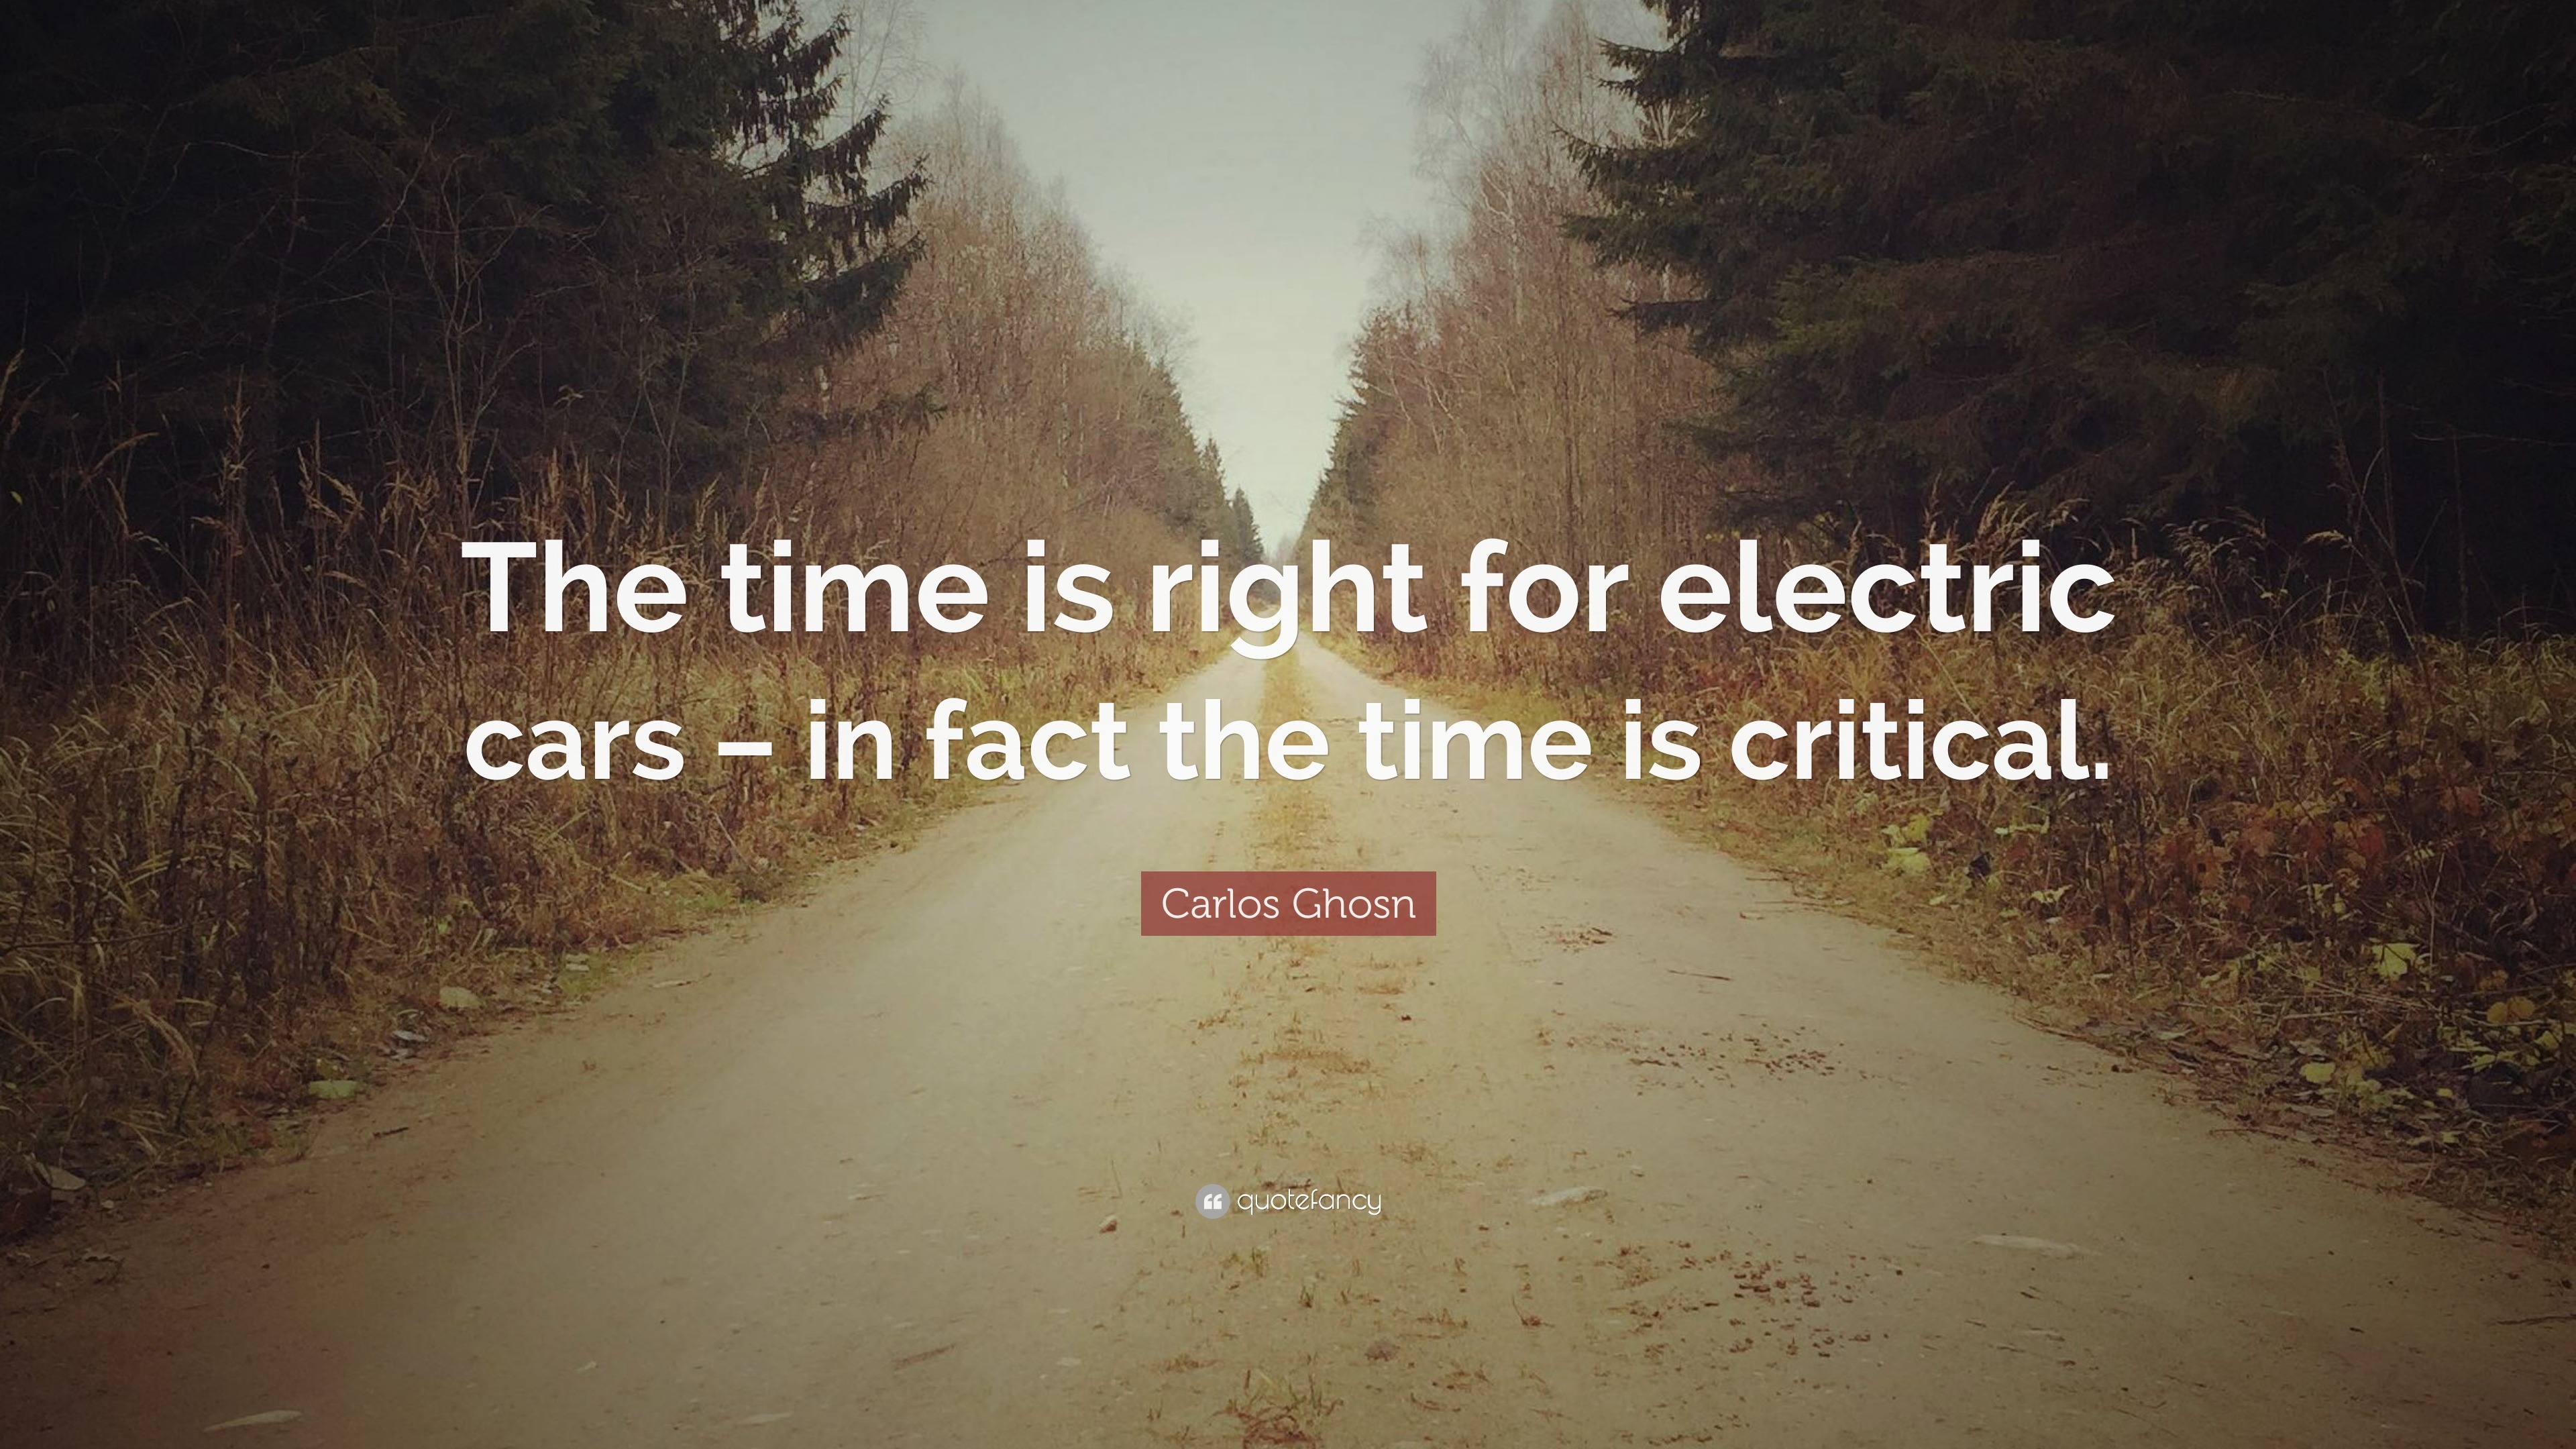 Carlos Ghosn Quote “The time is right for electric cars in fact the